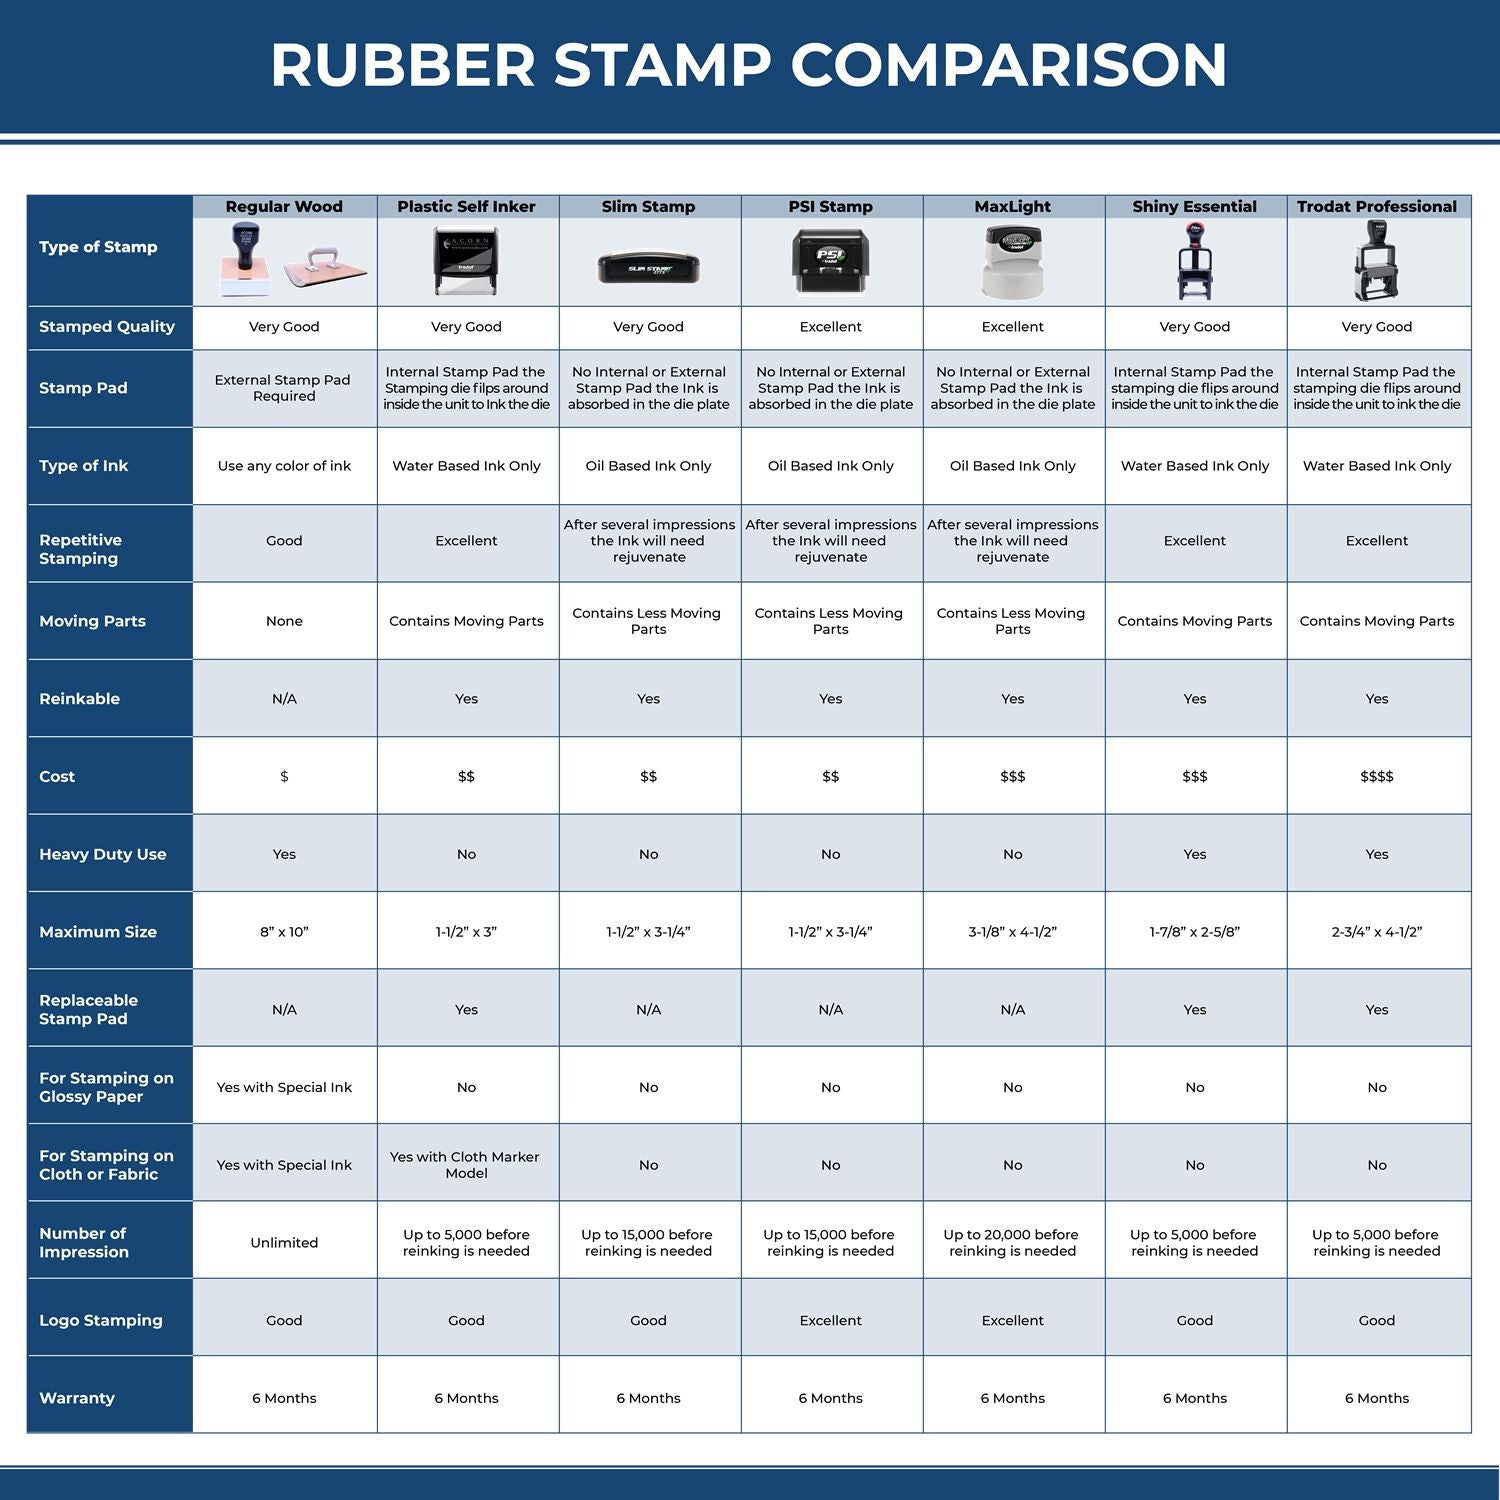 Not Approved For Construction Rubber Stamp 4037R Rubber Stamp Comparison